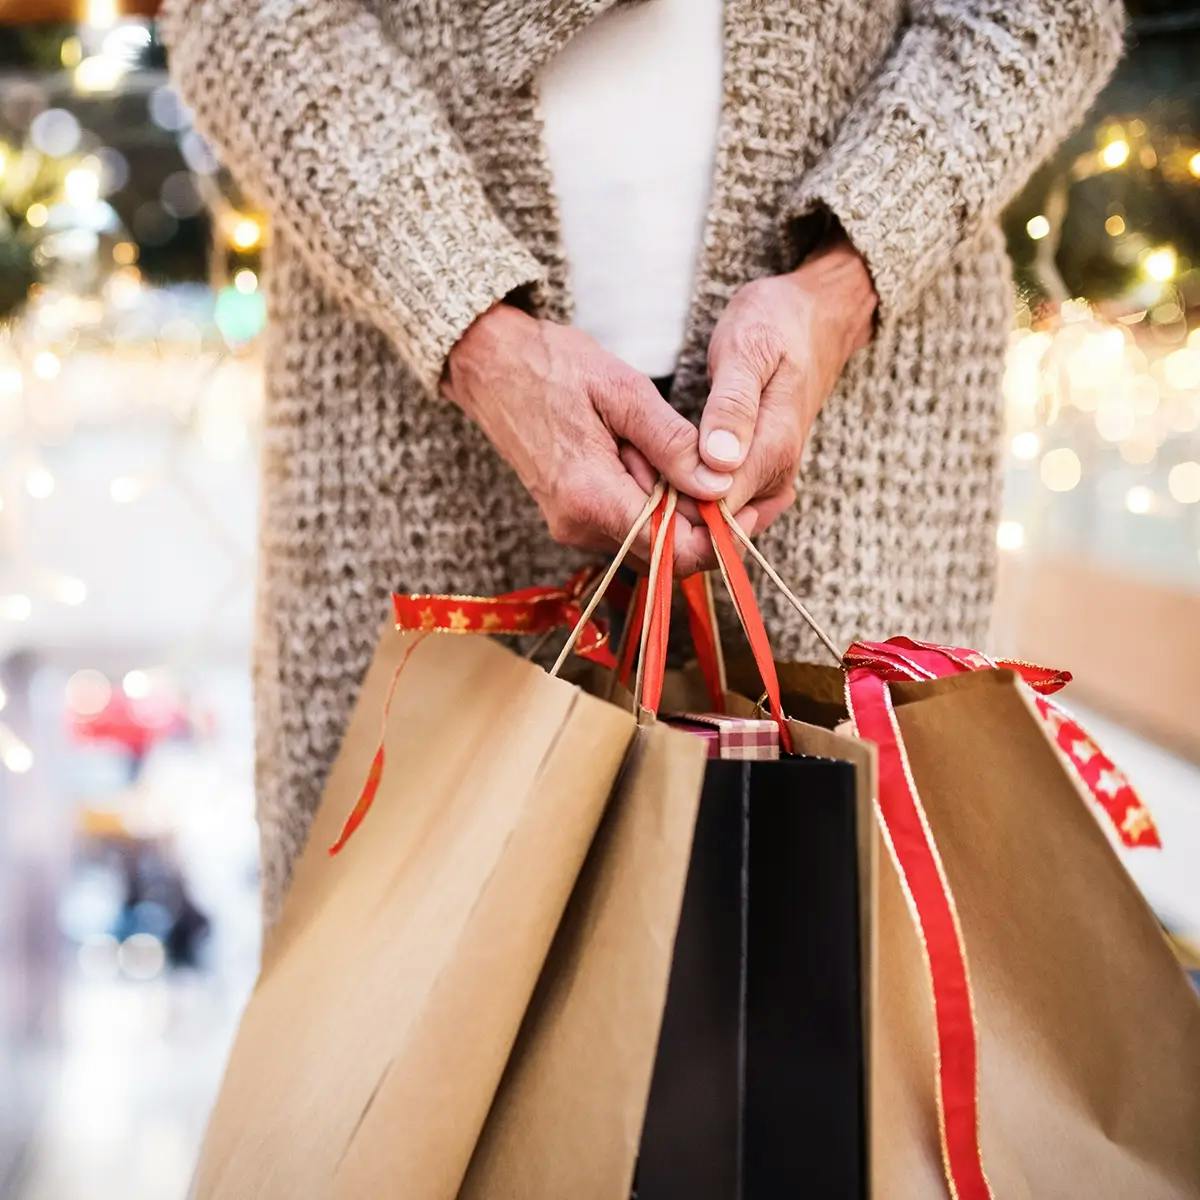 The Dos and Don’ts of Last-Minute Christmas Shopping